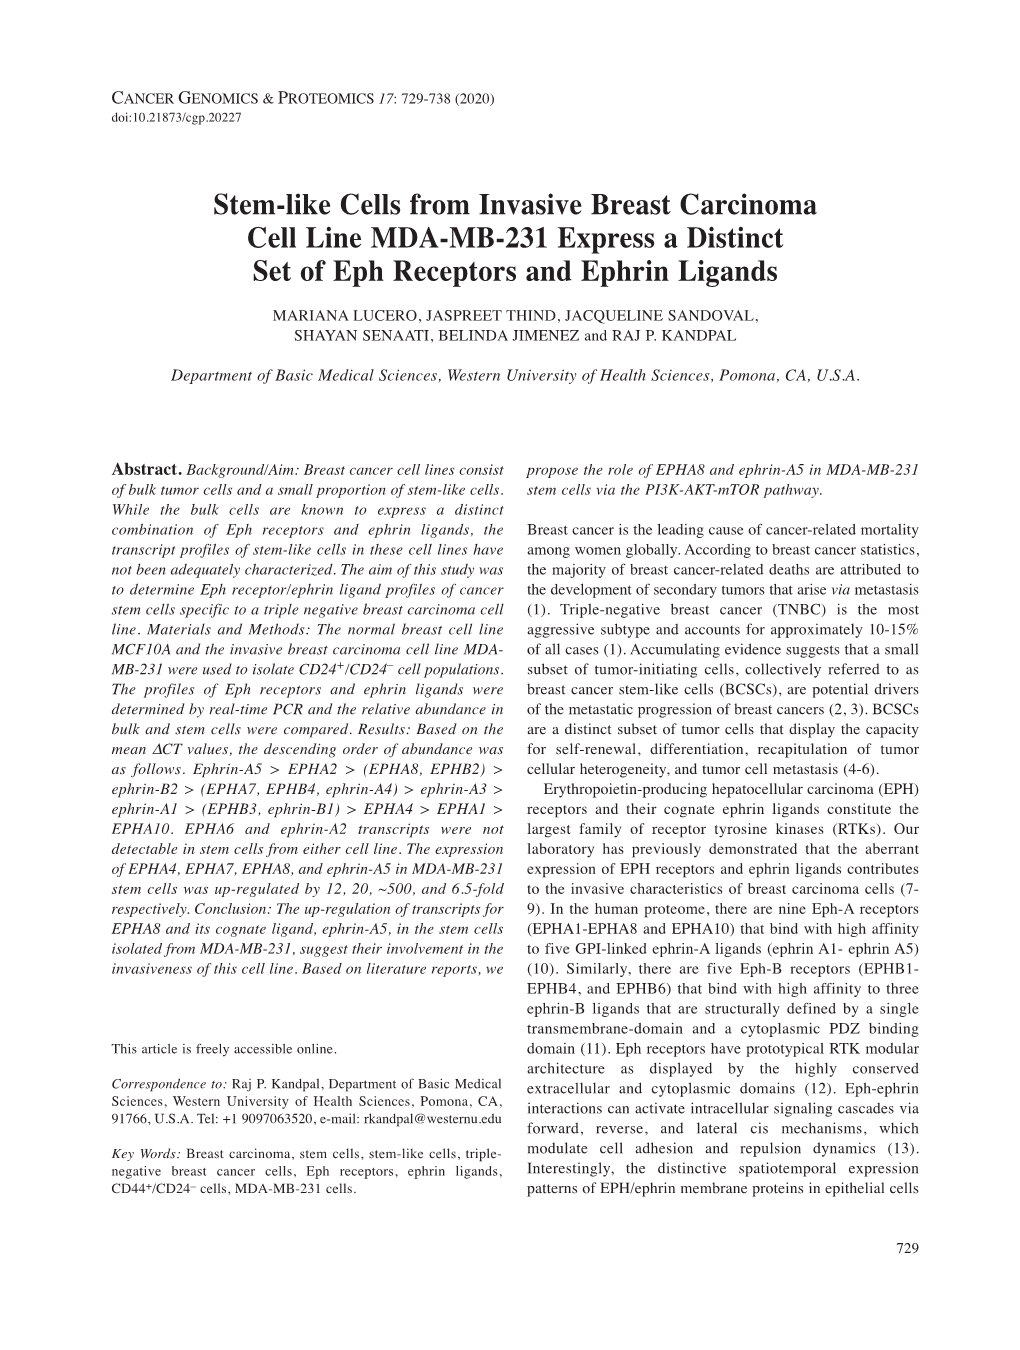 Stem-Like Cells from Invasive Breast Carcinoma Cell Line MDA-MB-231